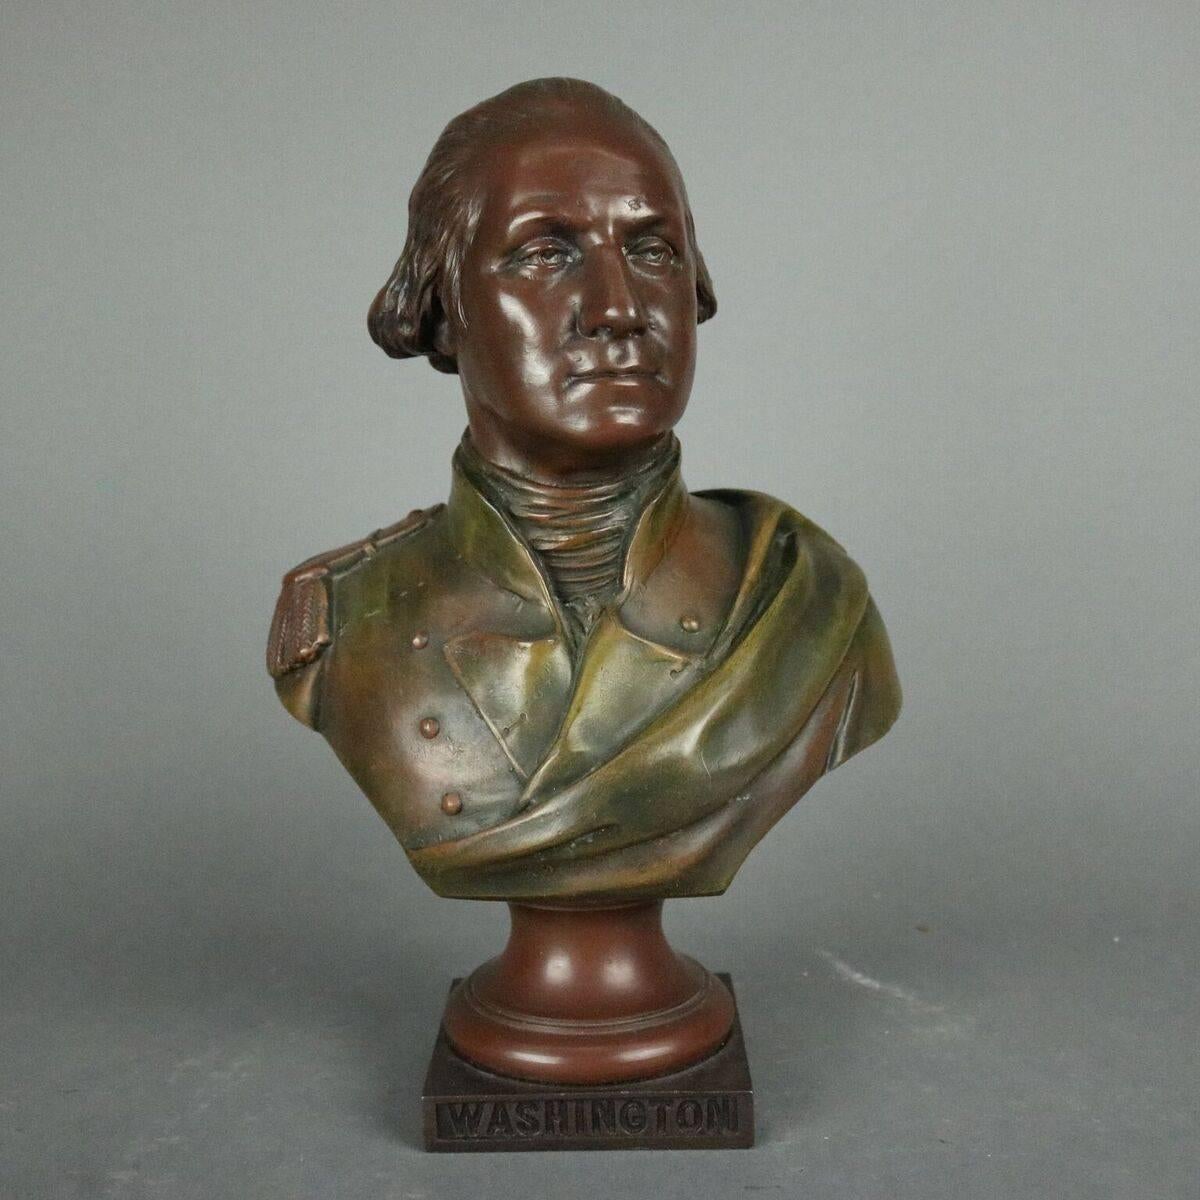 Antique bronzed white metal bust of General George Washington, sculpture after portrait of George Washington in military uniform, painted by Rembrandt Peale, foundry mark of Fabrication franchise Paris reads 